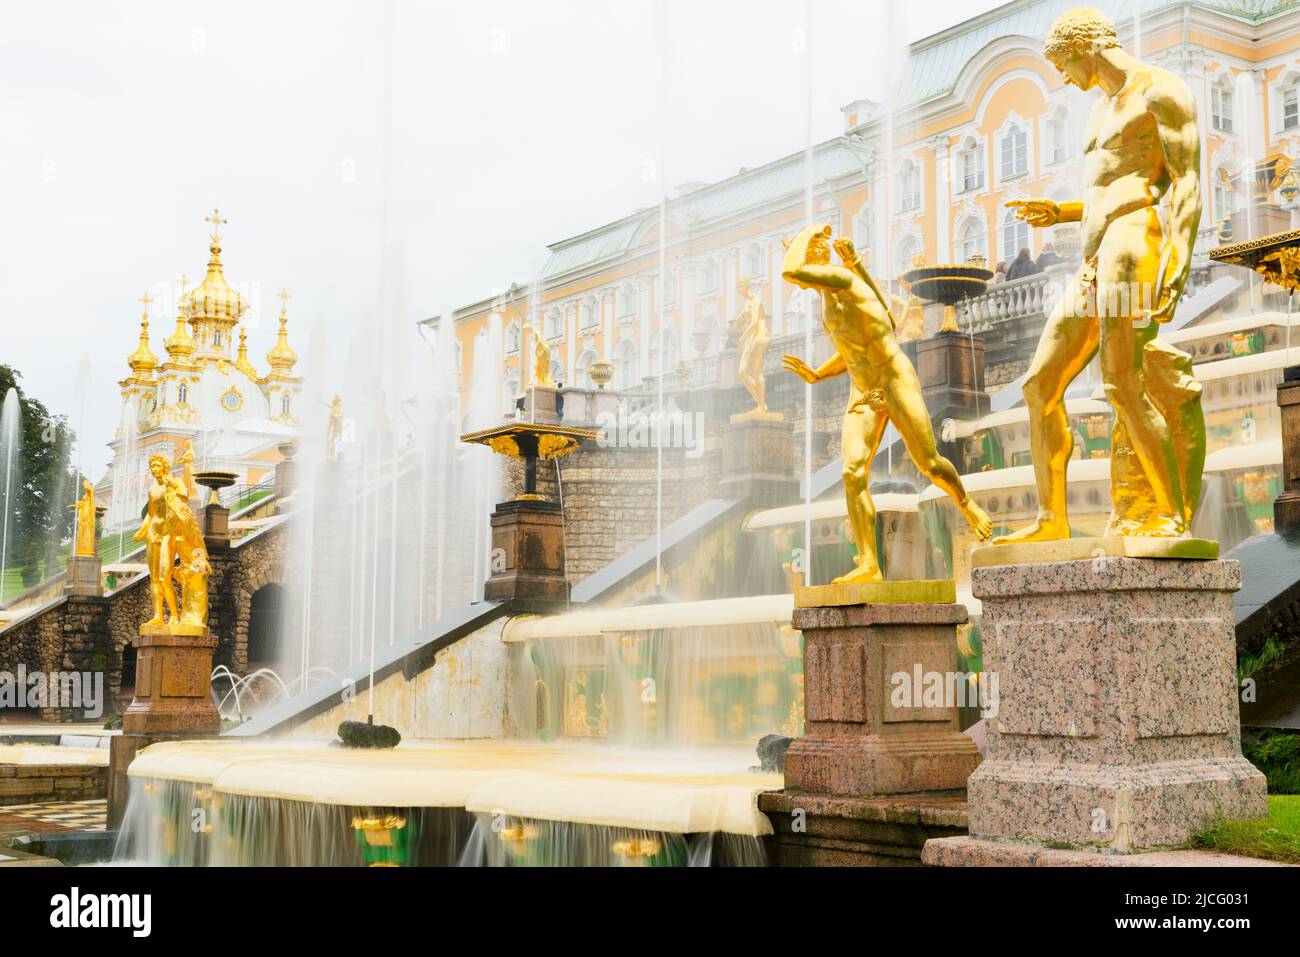 The Grand Cascade in front of the Grand Palace, Peterhof, near Saint Petersburg, Russia Stock Photo